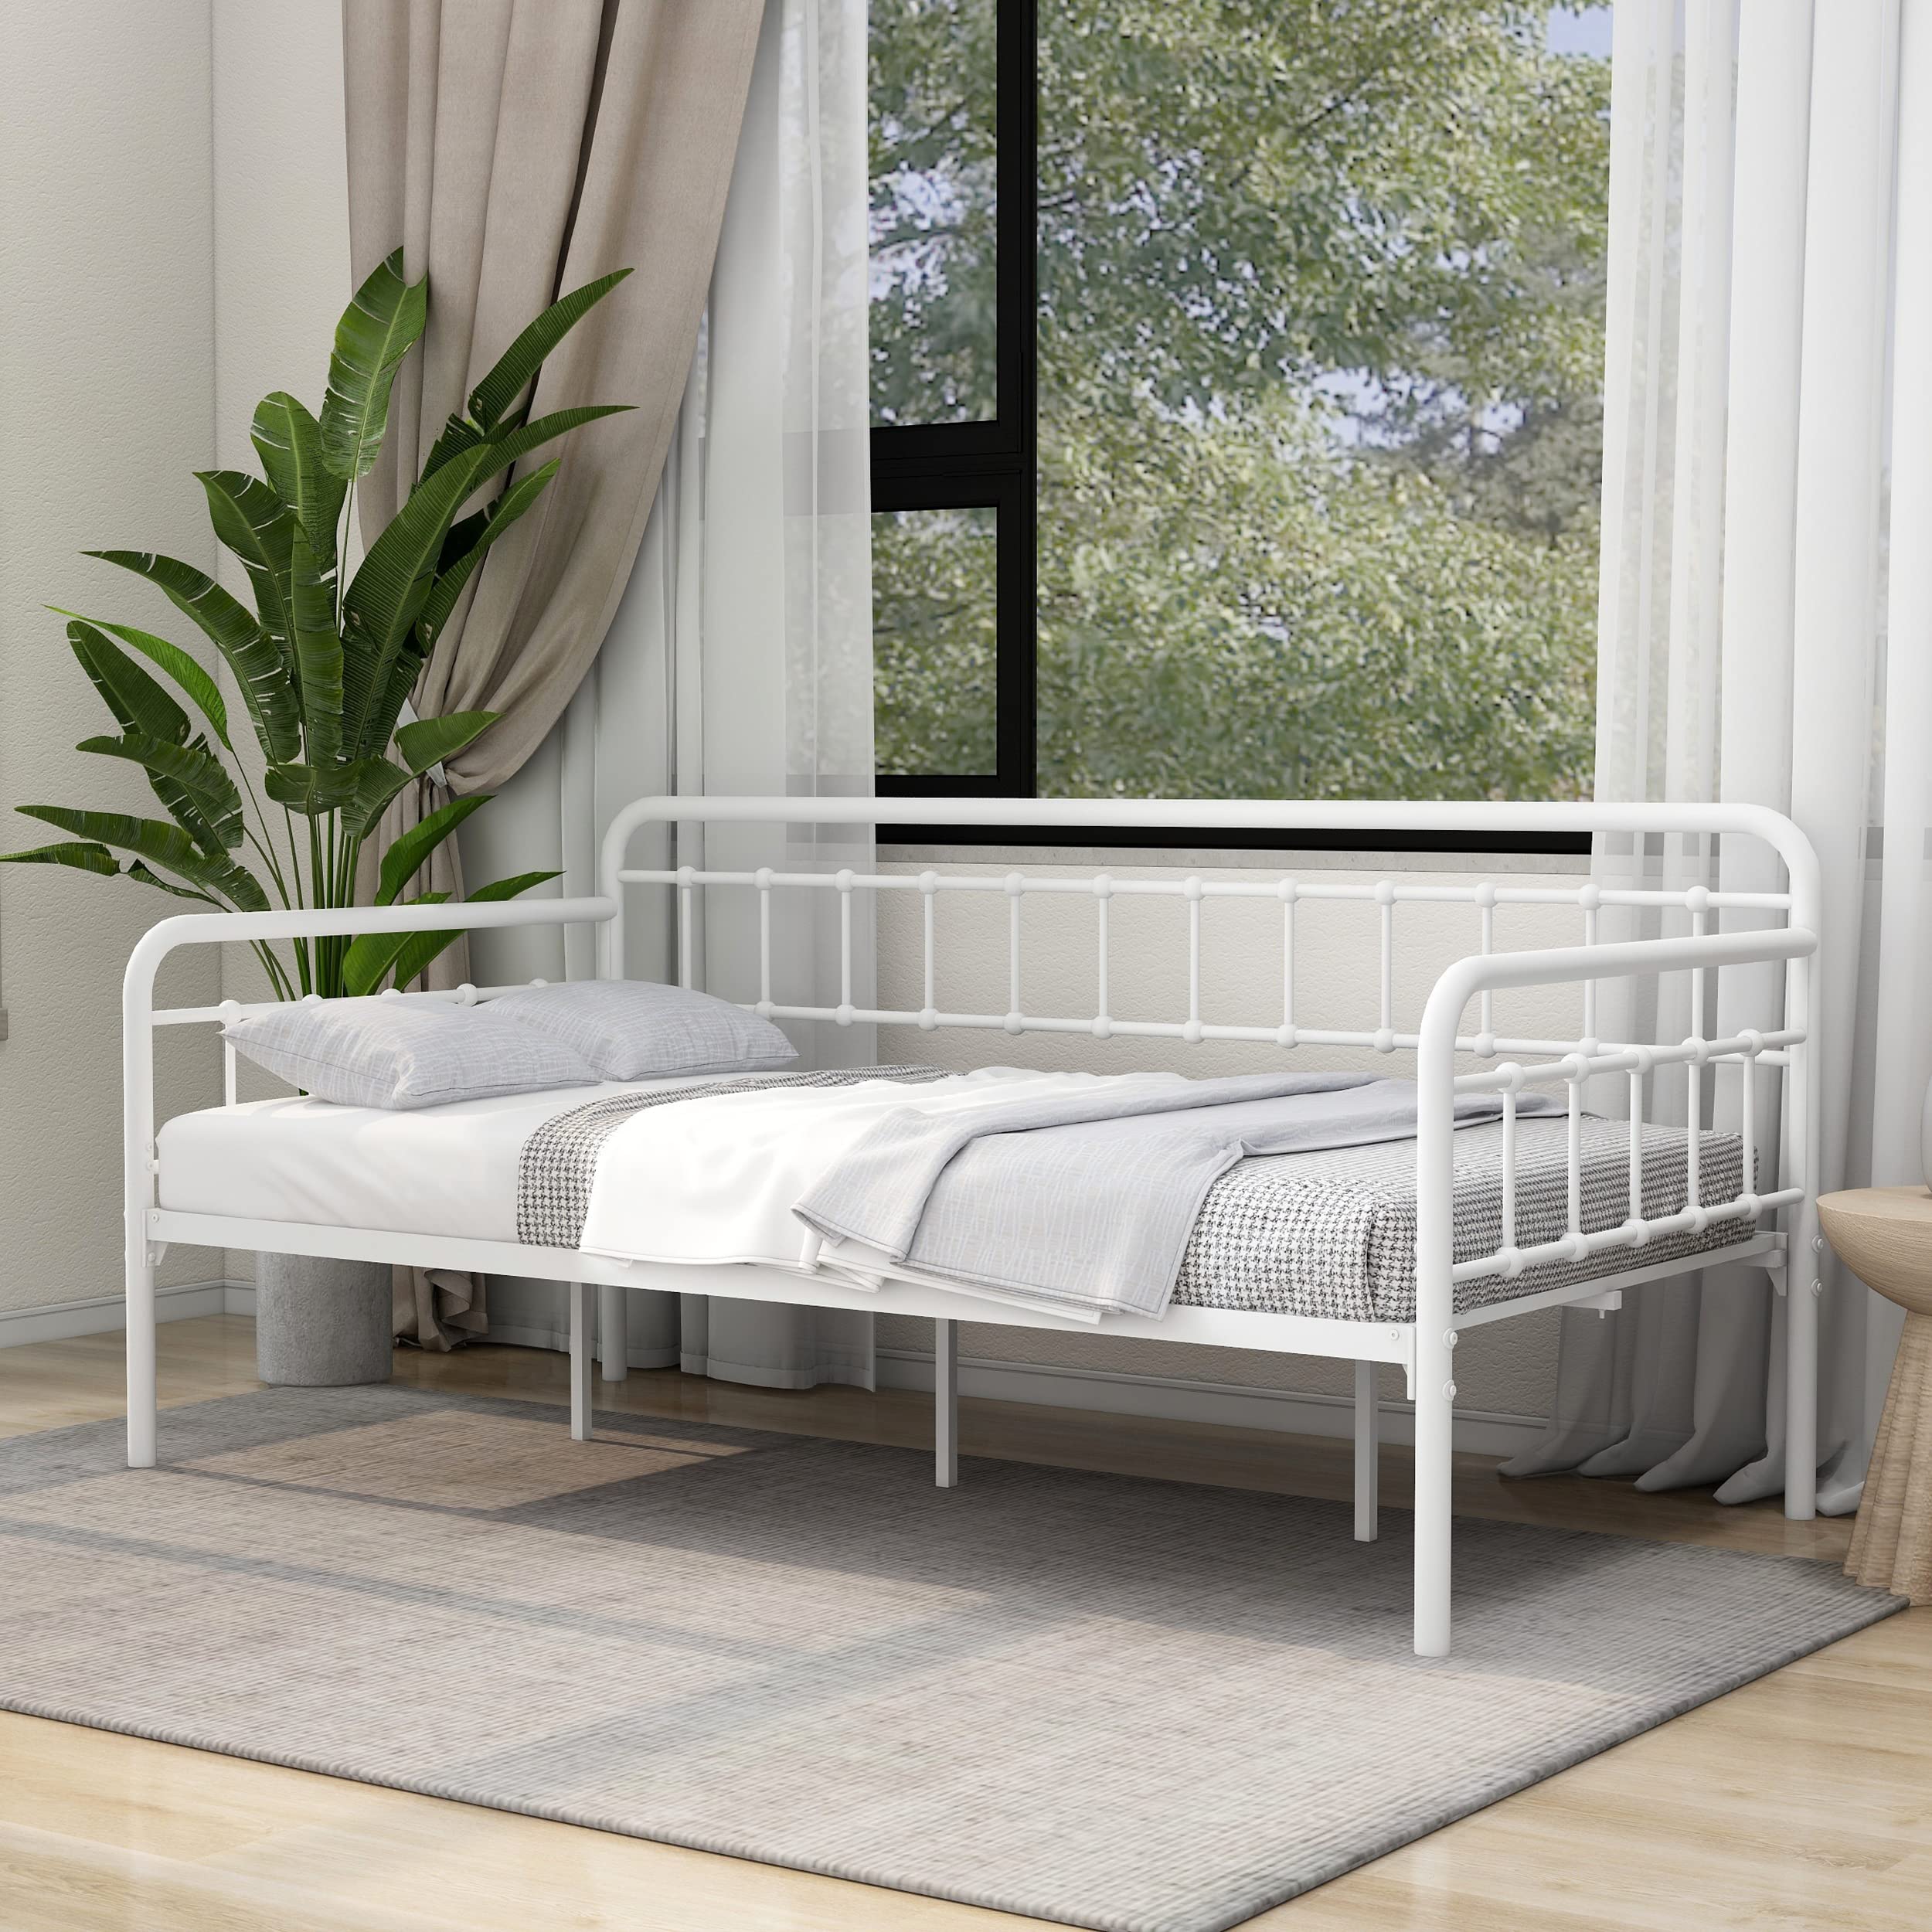 RYR Metal Daybed Frame Twin with Headboard Heavy Steel Slat Support Platform Mattress Foundation Sofa Bed for Living Room guest 